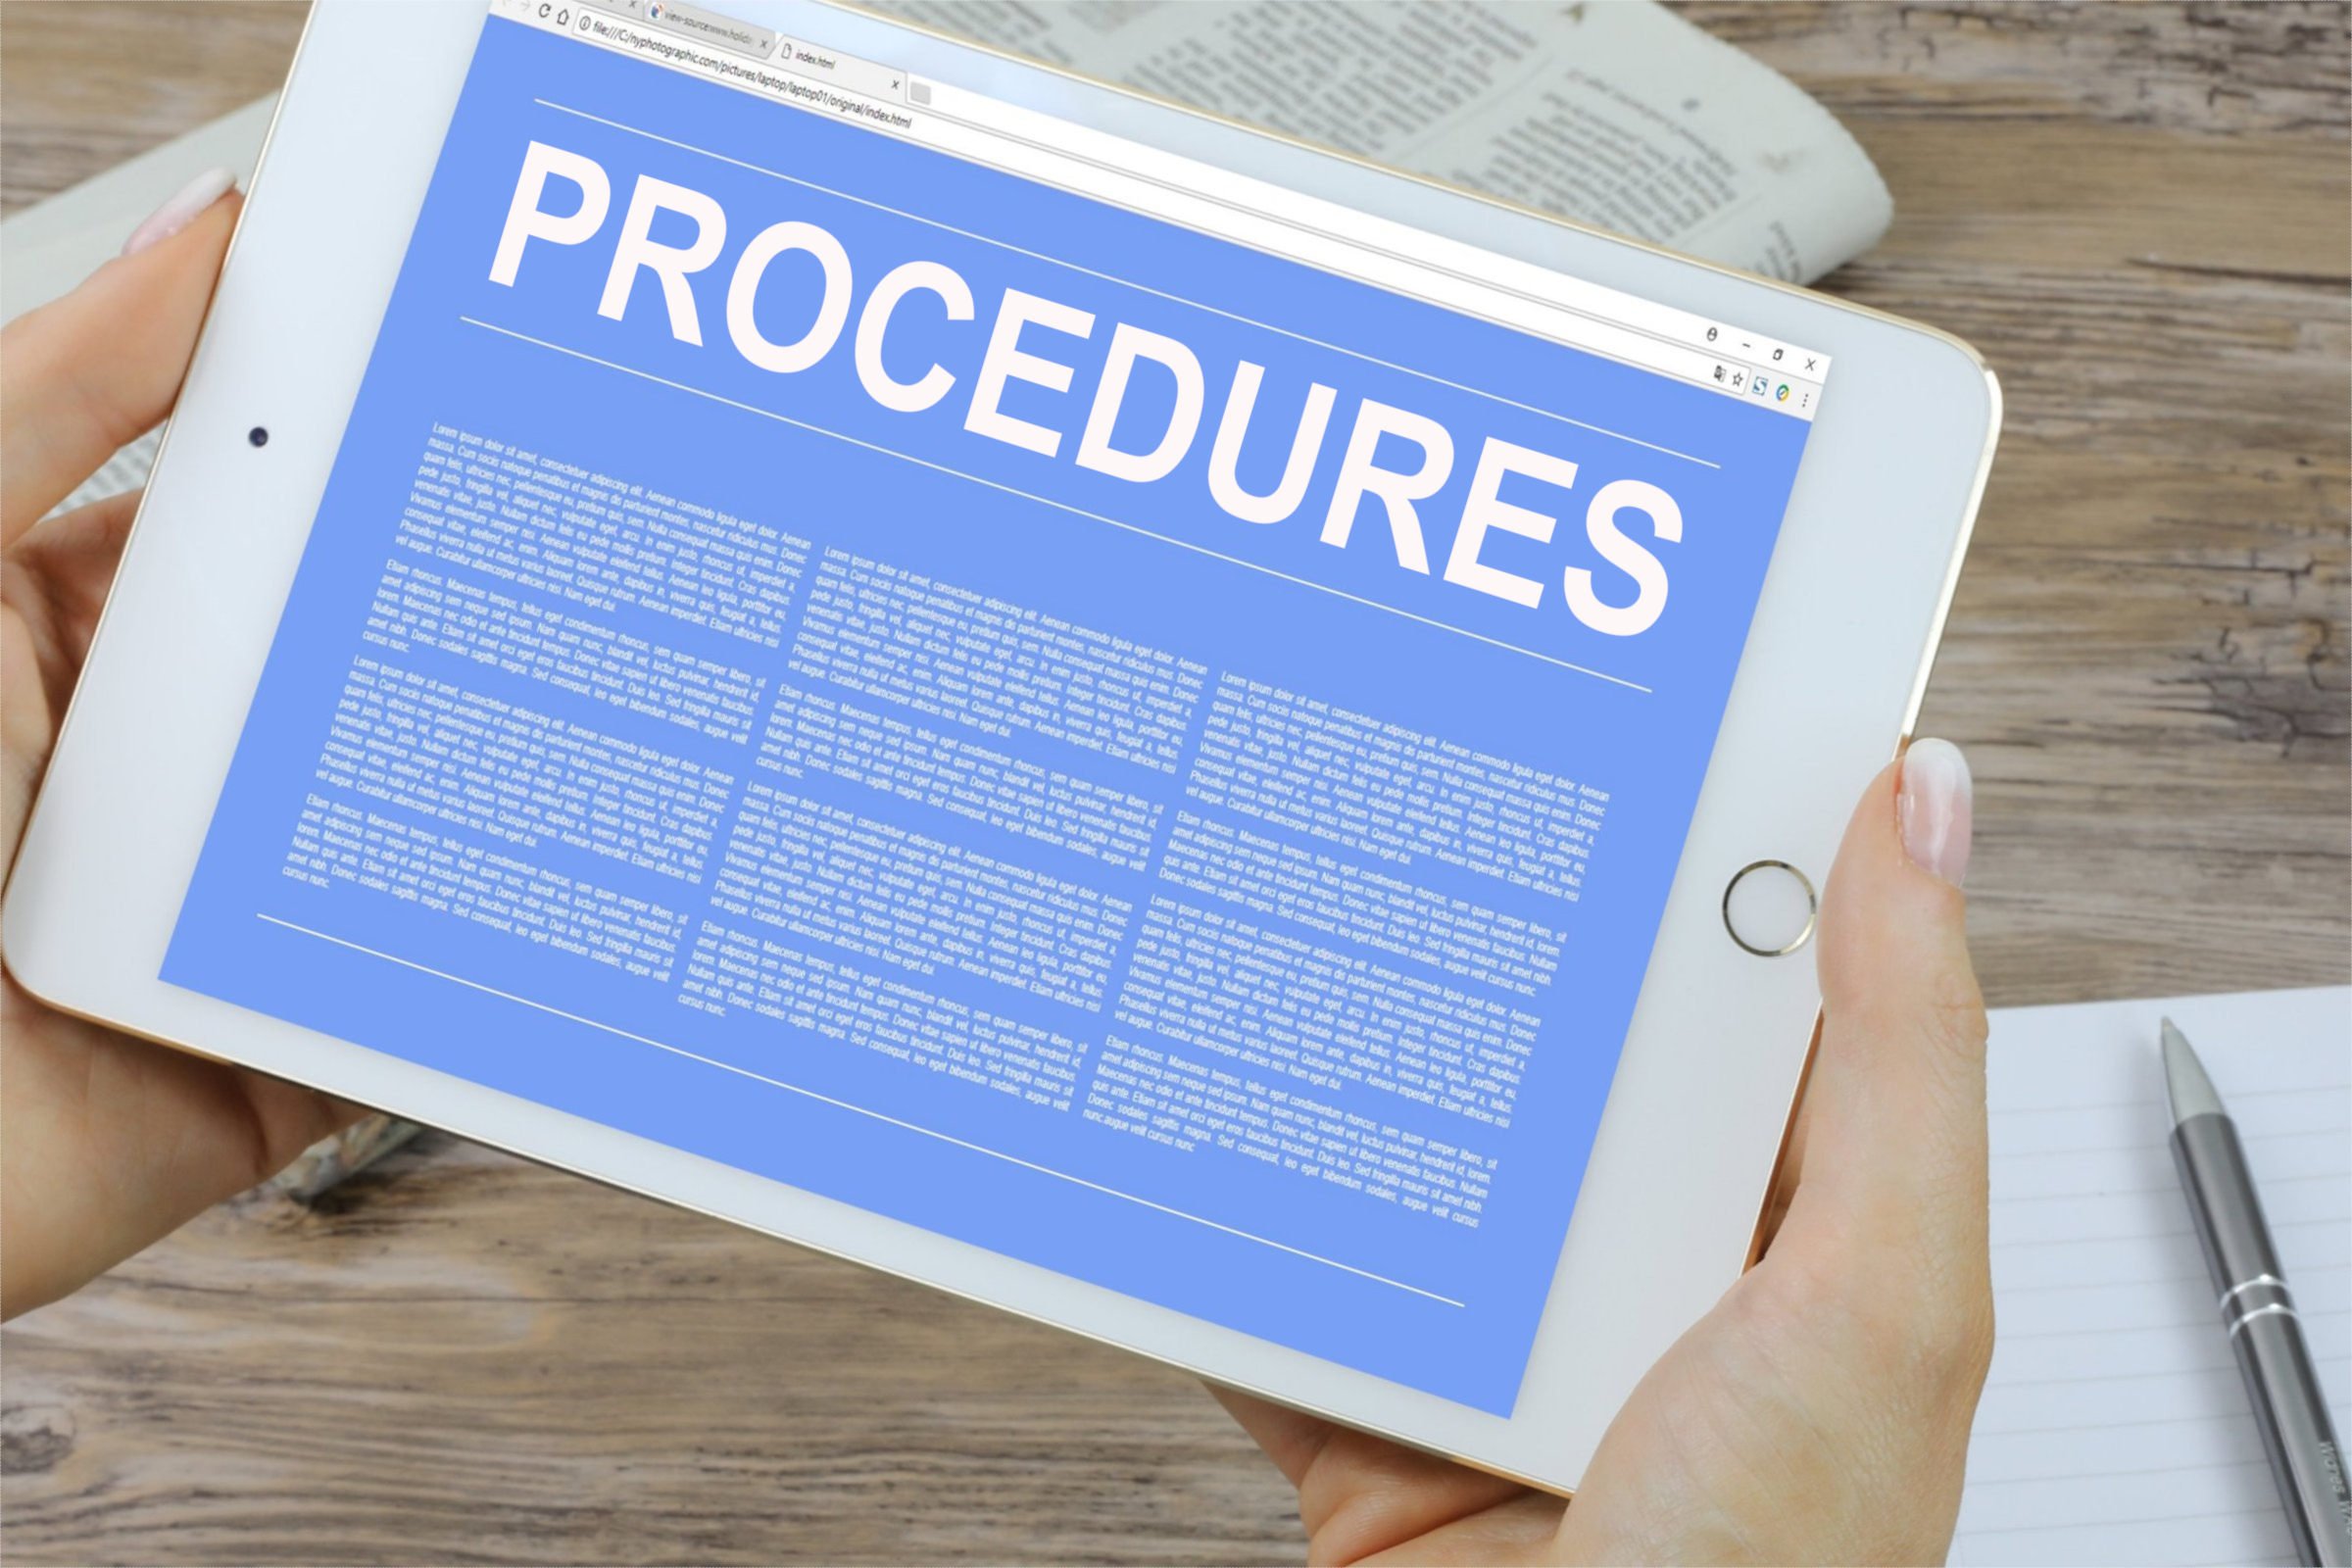 free-of-charge-creative-commons-procedures-image-tablet-1